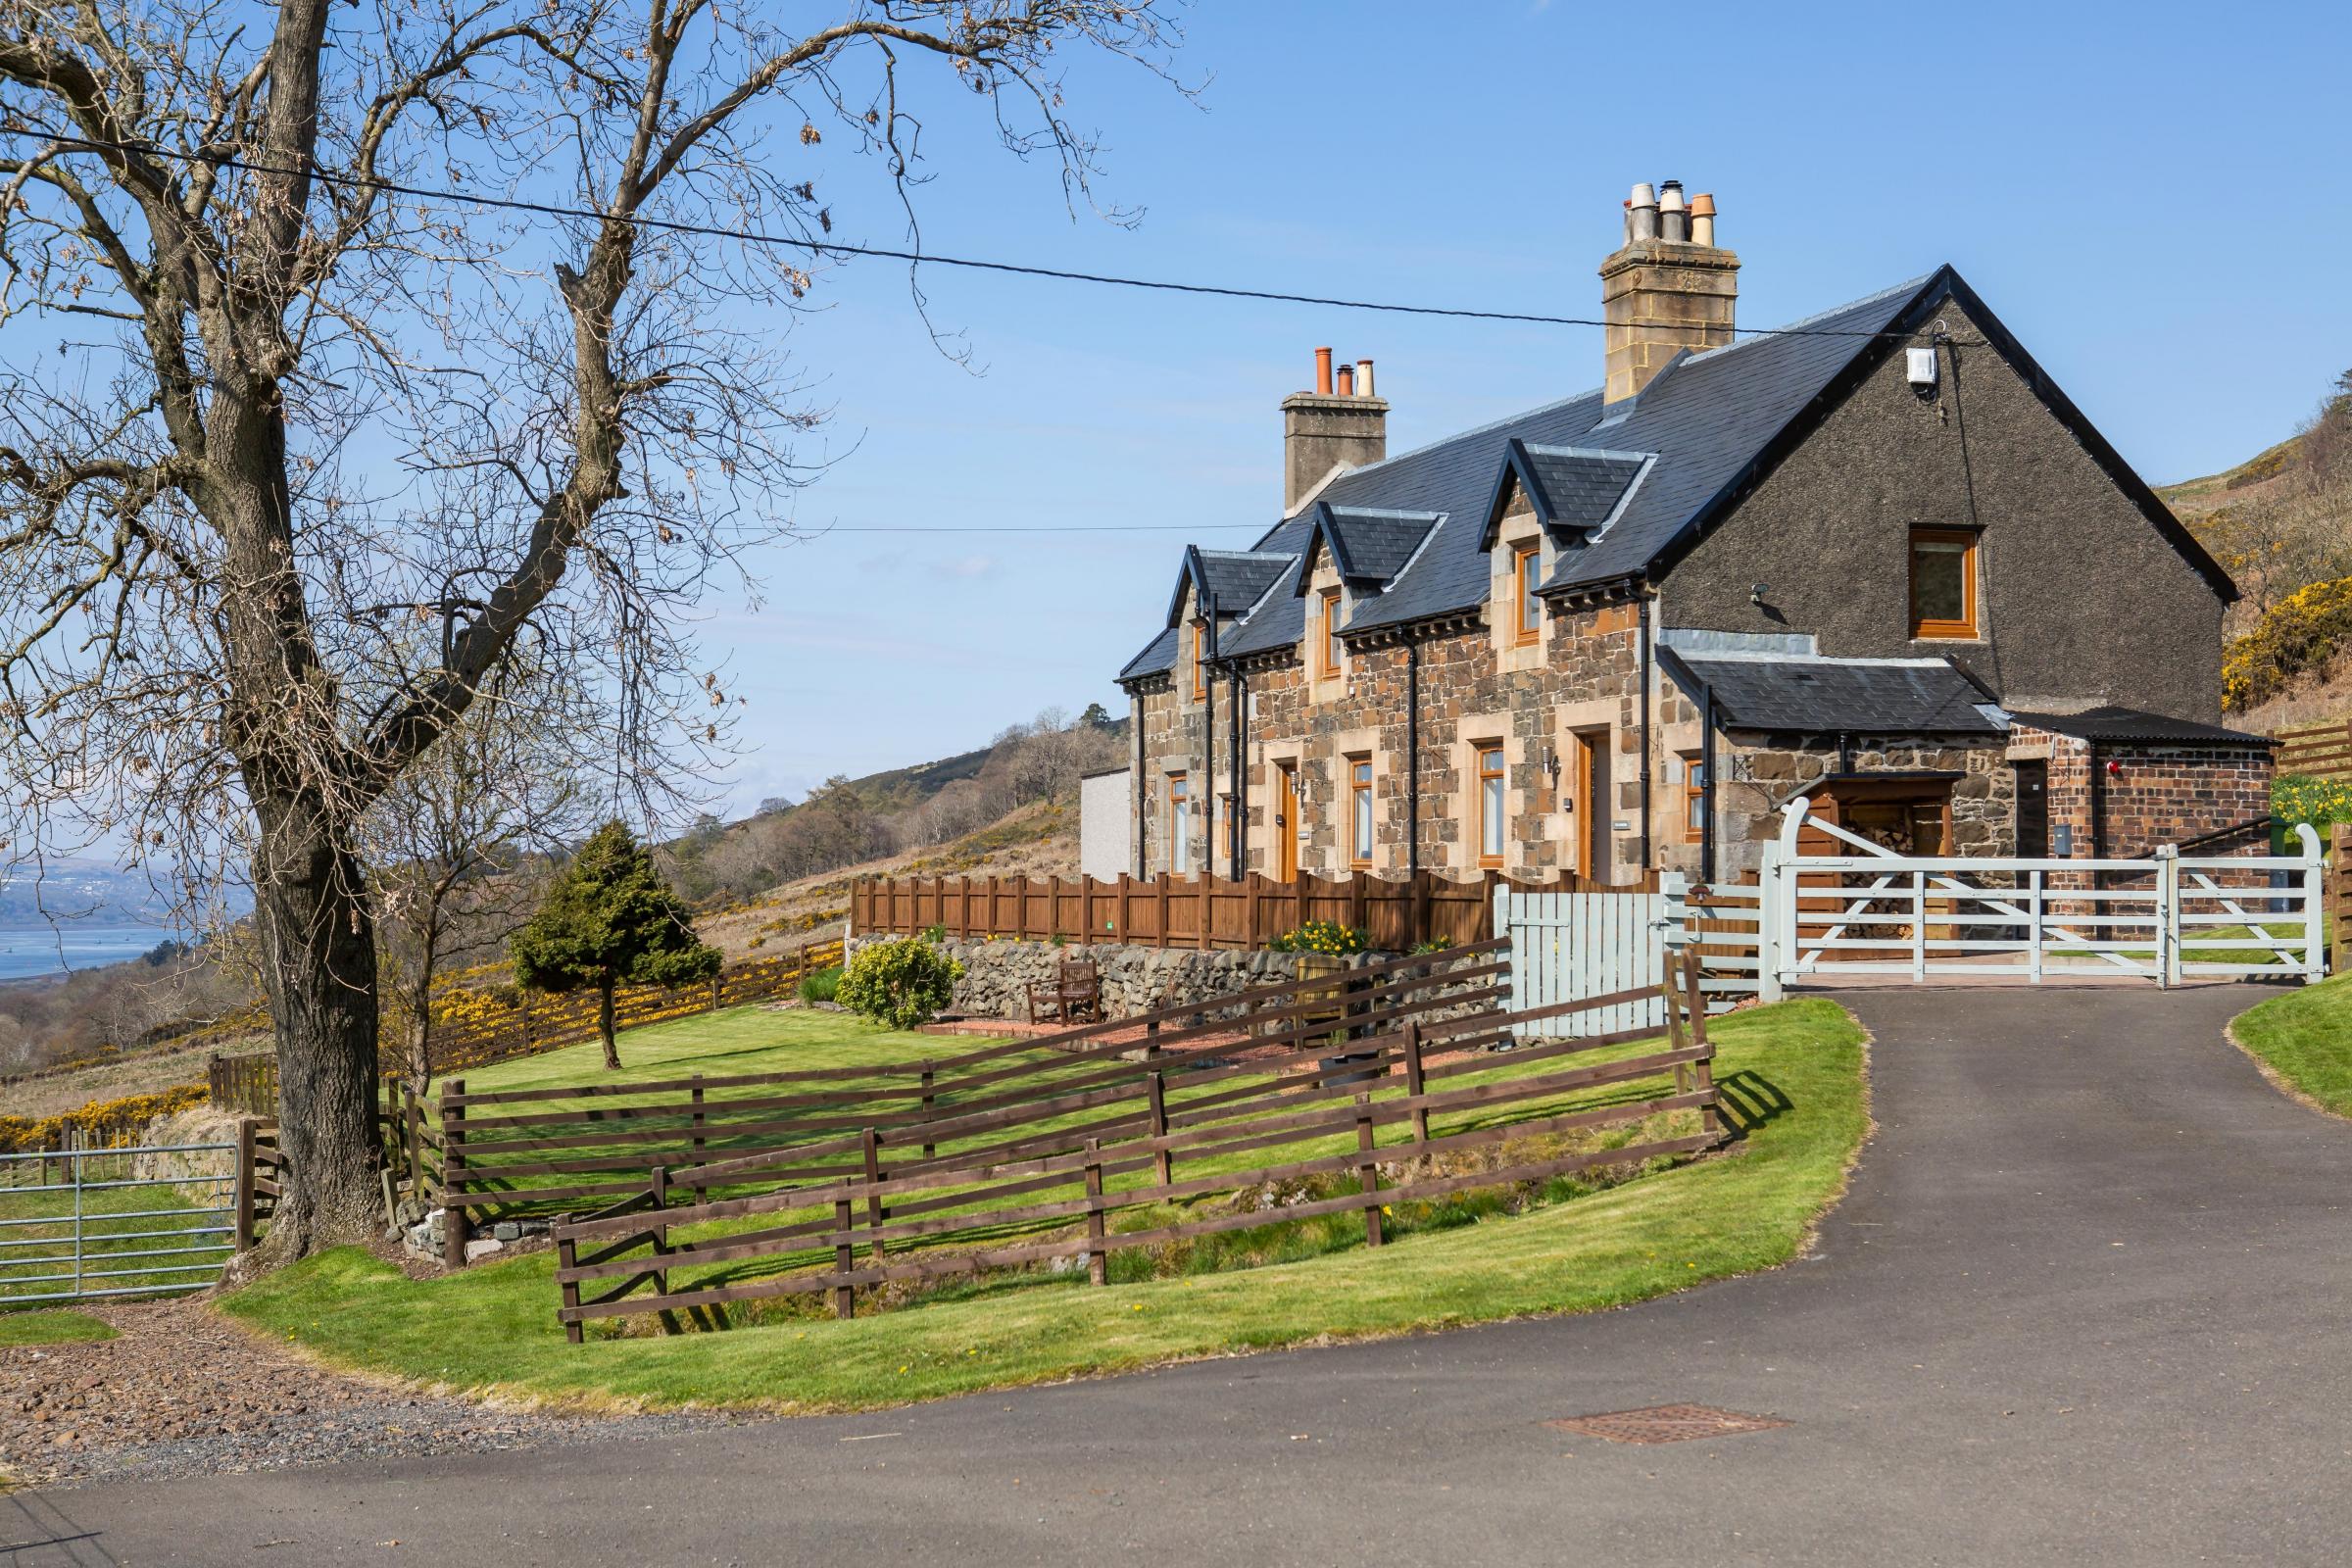 There are five cottages offering farm holidays at Gavinburn (Pic: Andy Surridge)